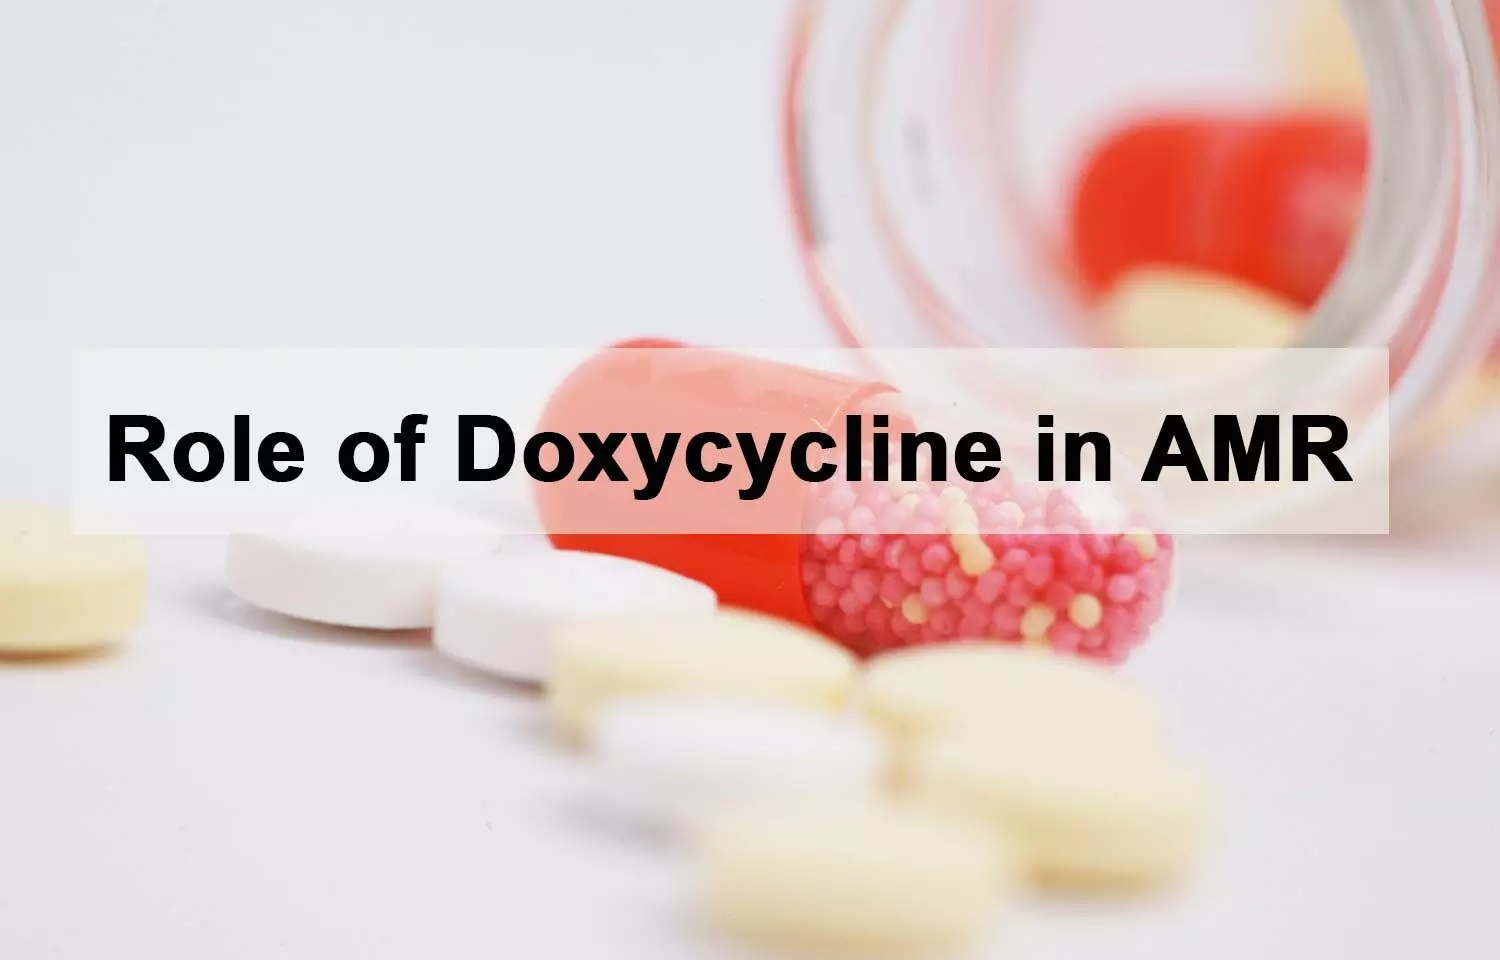 Doxycycline Defying Antimicrobial Resistance in India: Results from 2020 Study